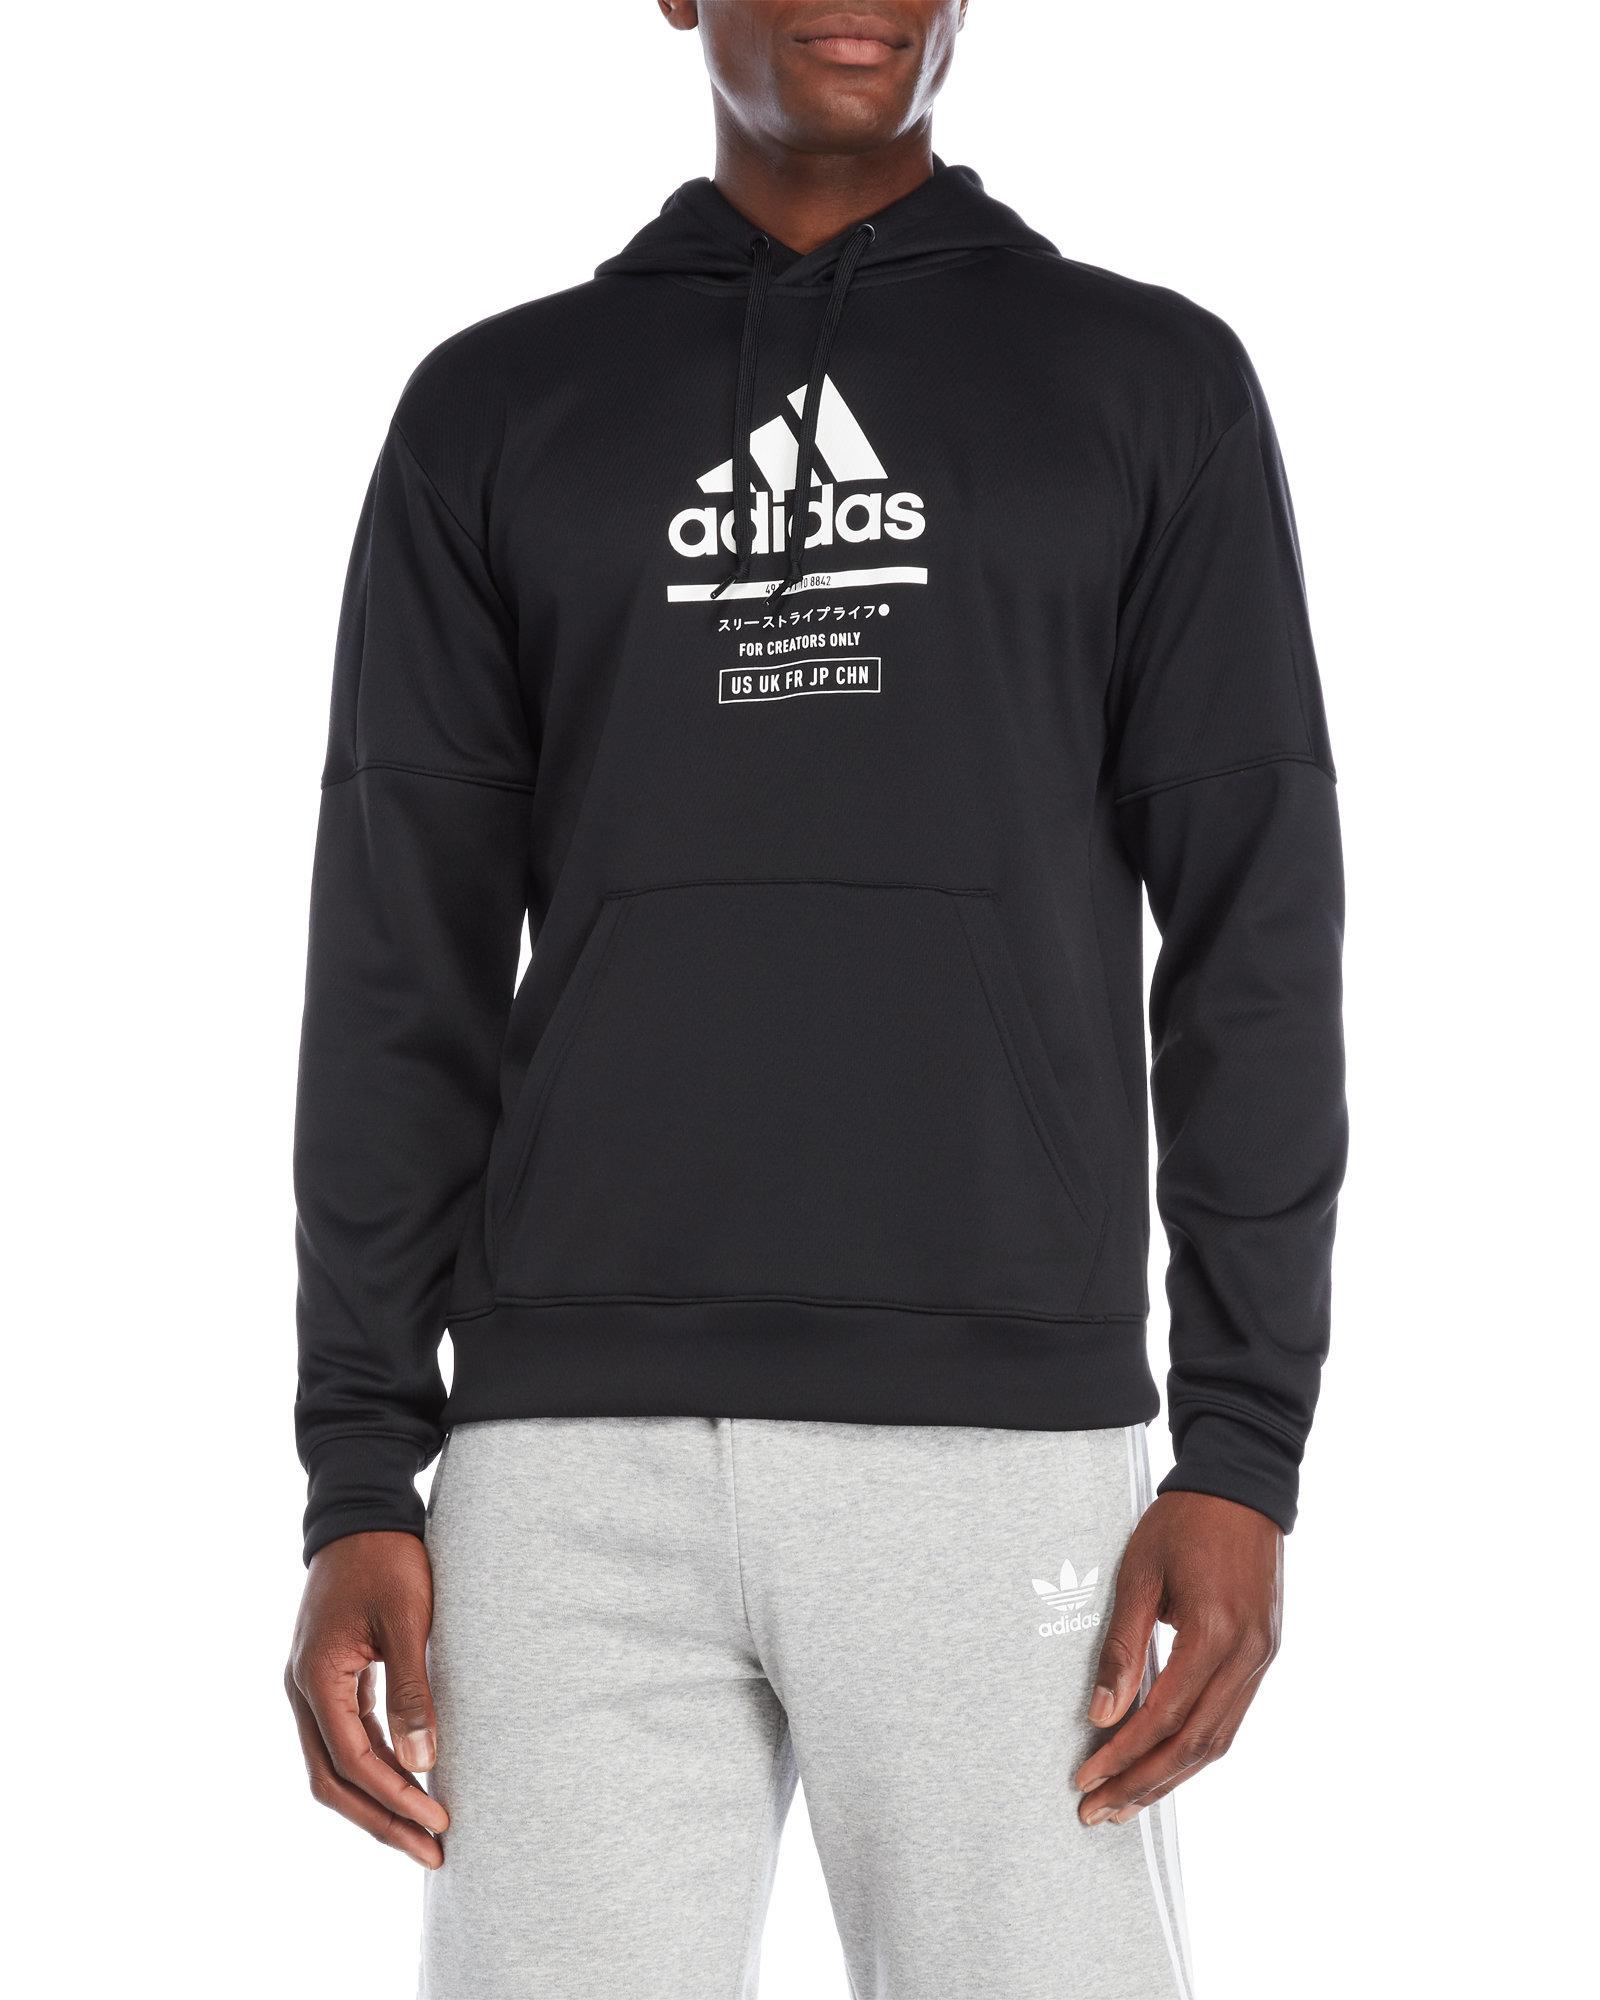 for creators only adidas hoodie